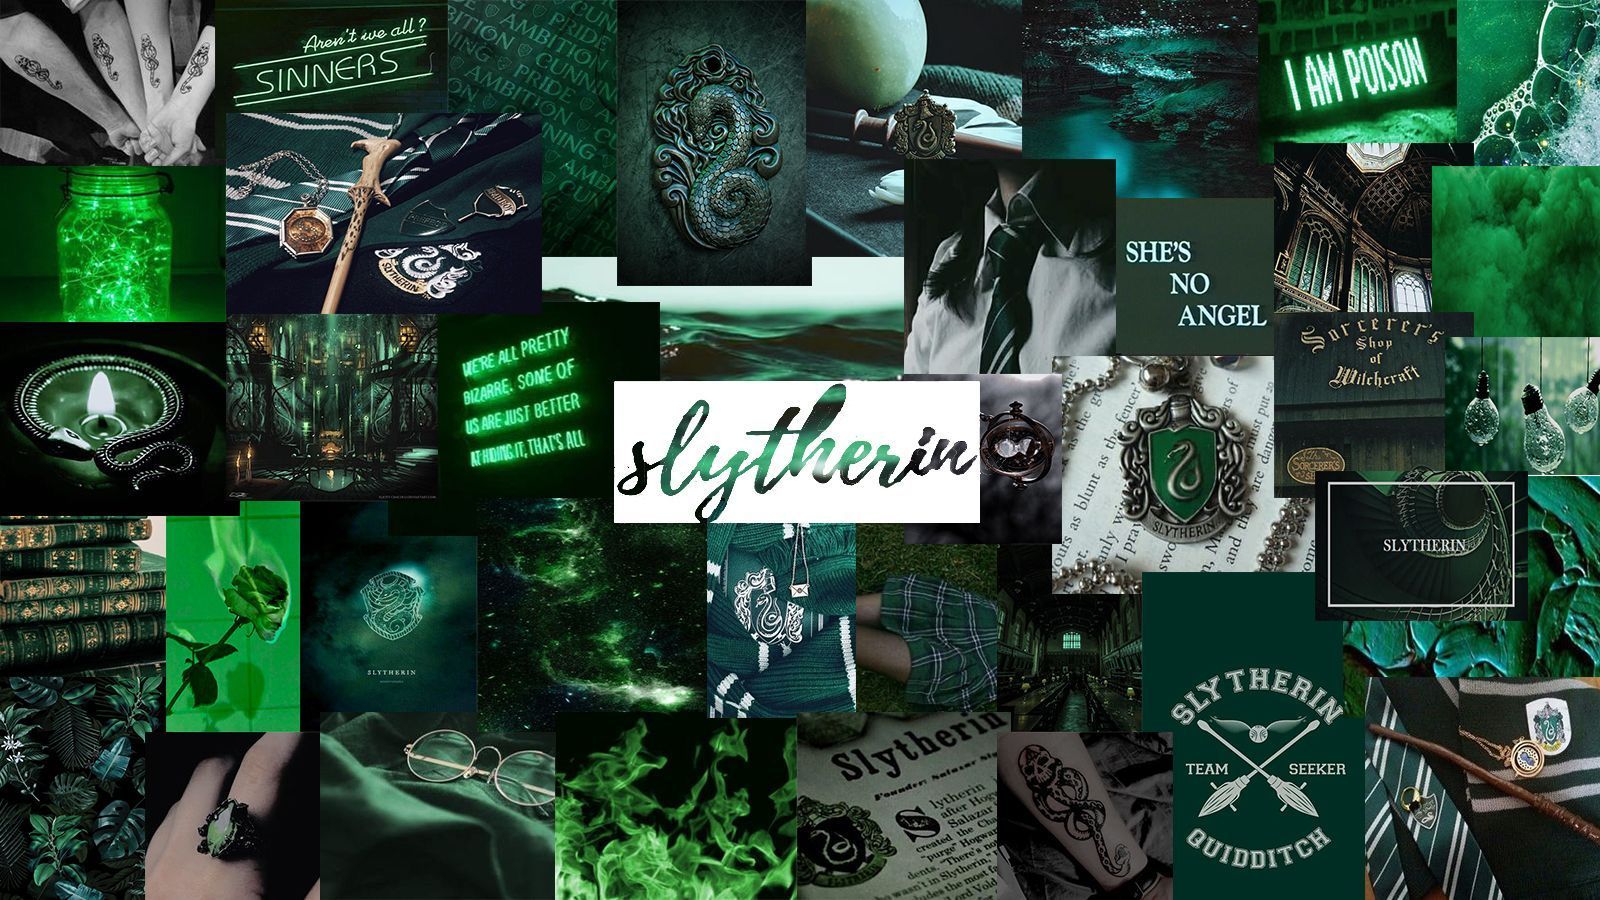 A collage of green and black Slytherin images. - Slytherin